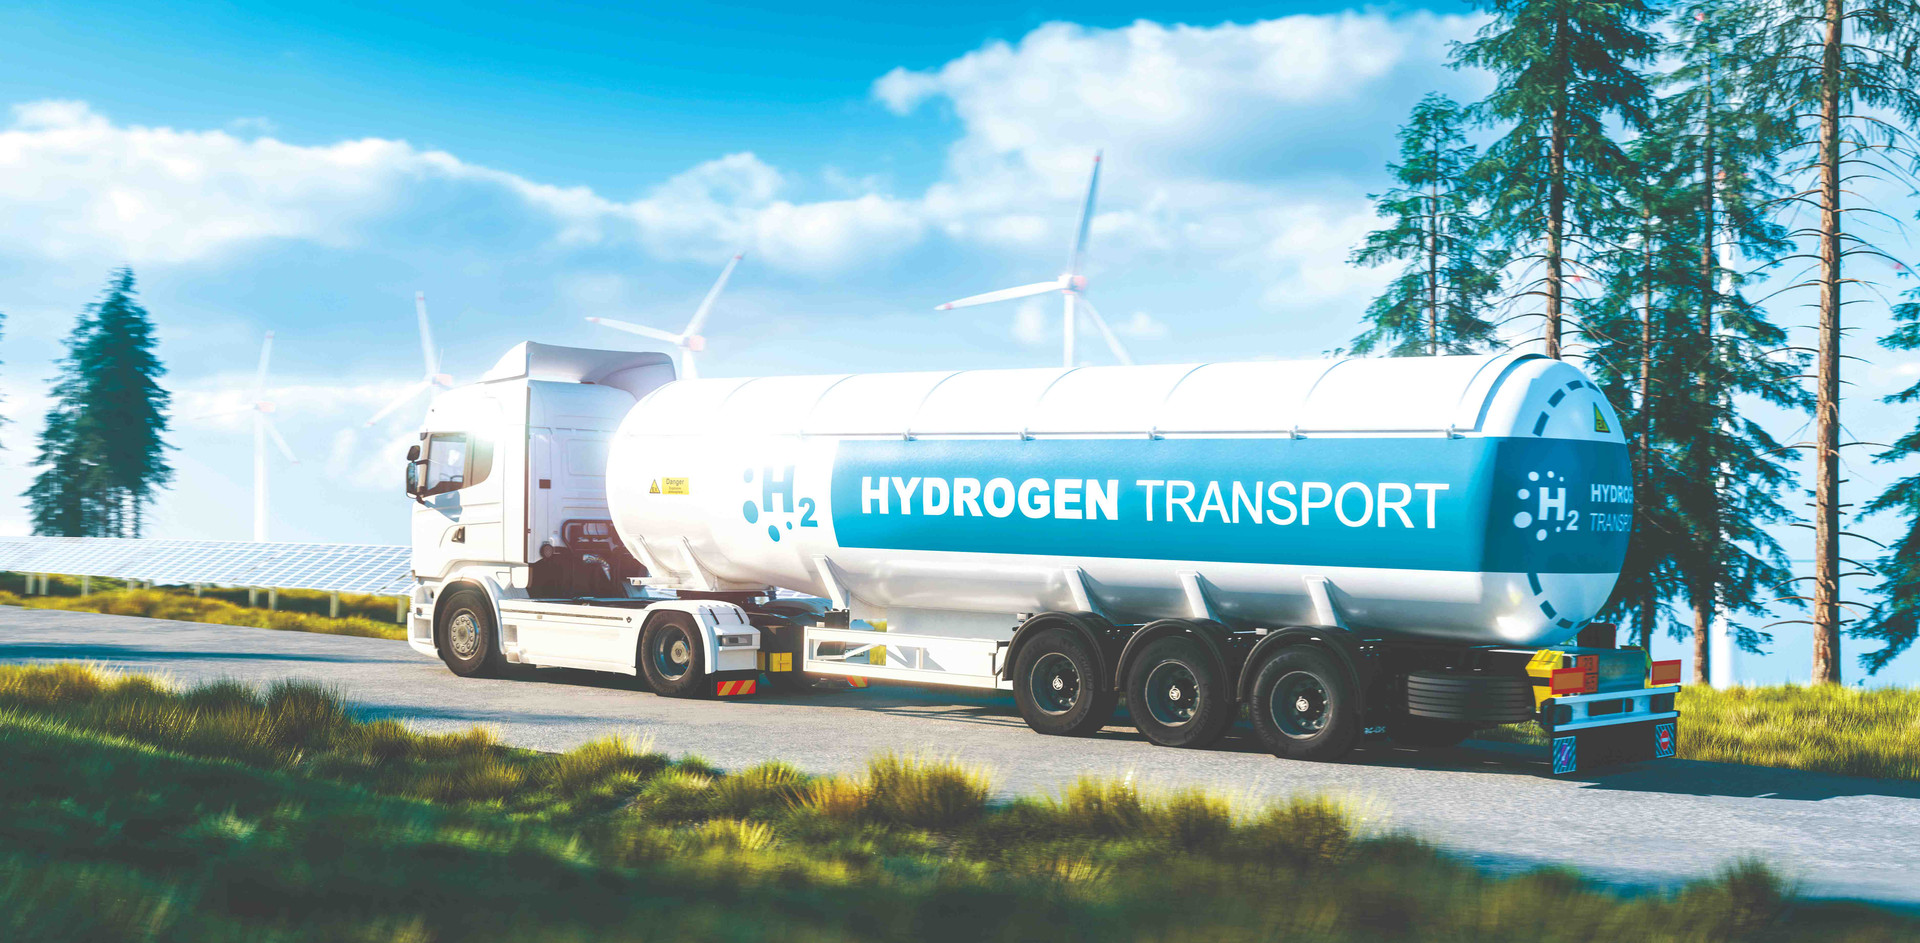 hydrogen-gas-transportation-concept-truck-with-gas-tank-trailer-fresh-nature-with-solar-panel-wind-turbine-background-3d-rendering-compressed.jpg